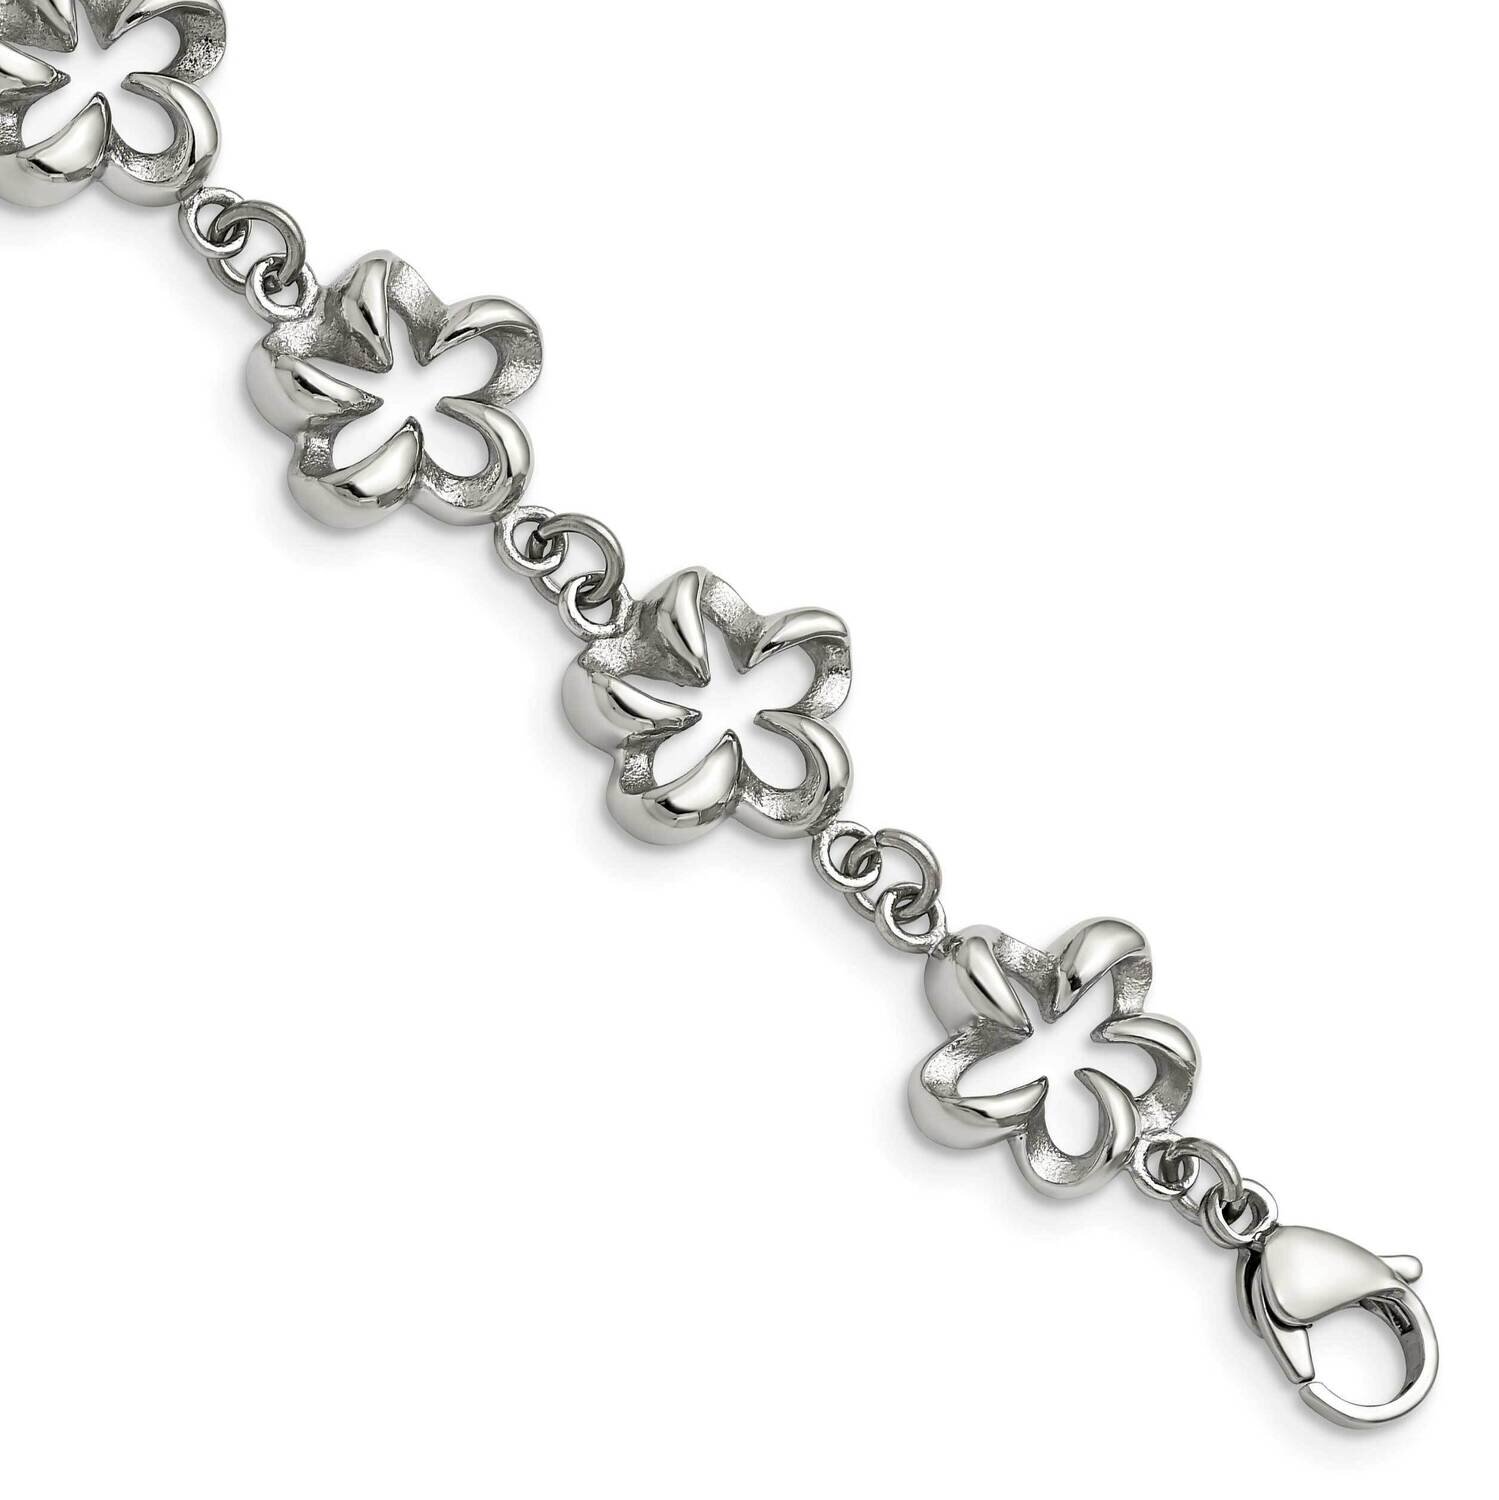 Cut-out Flowers 7.5 Inch Bracelet Stainless Steel Polished SRB1060-7.5